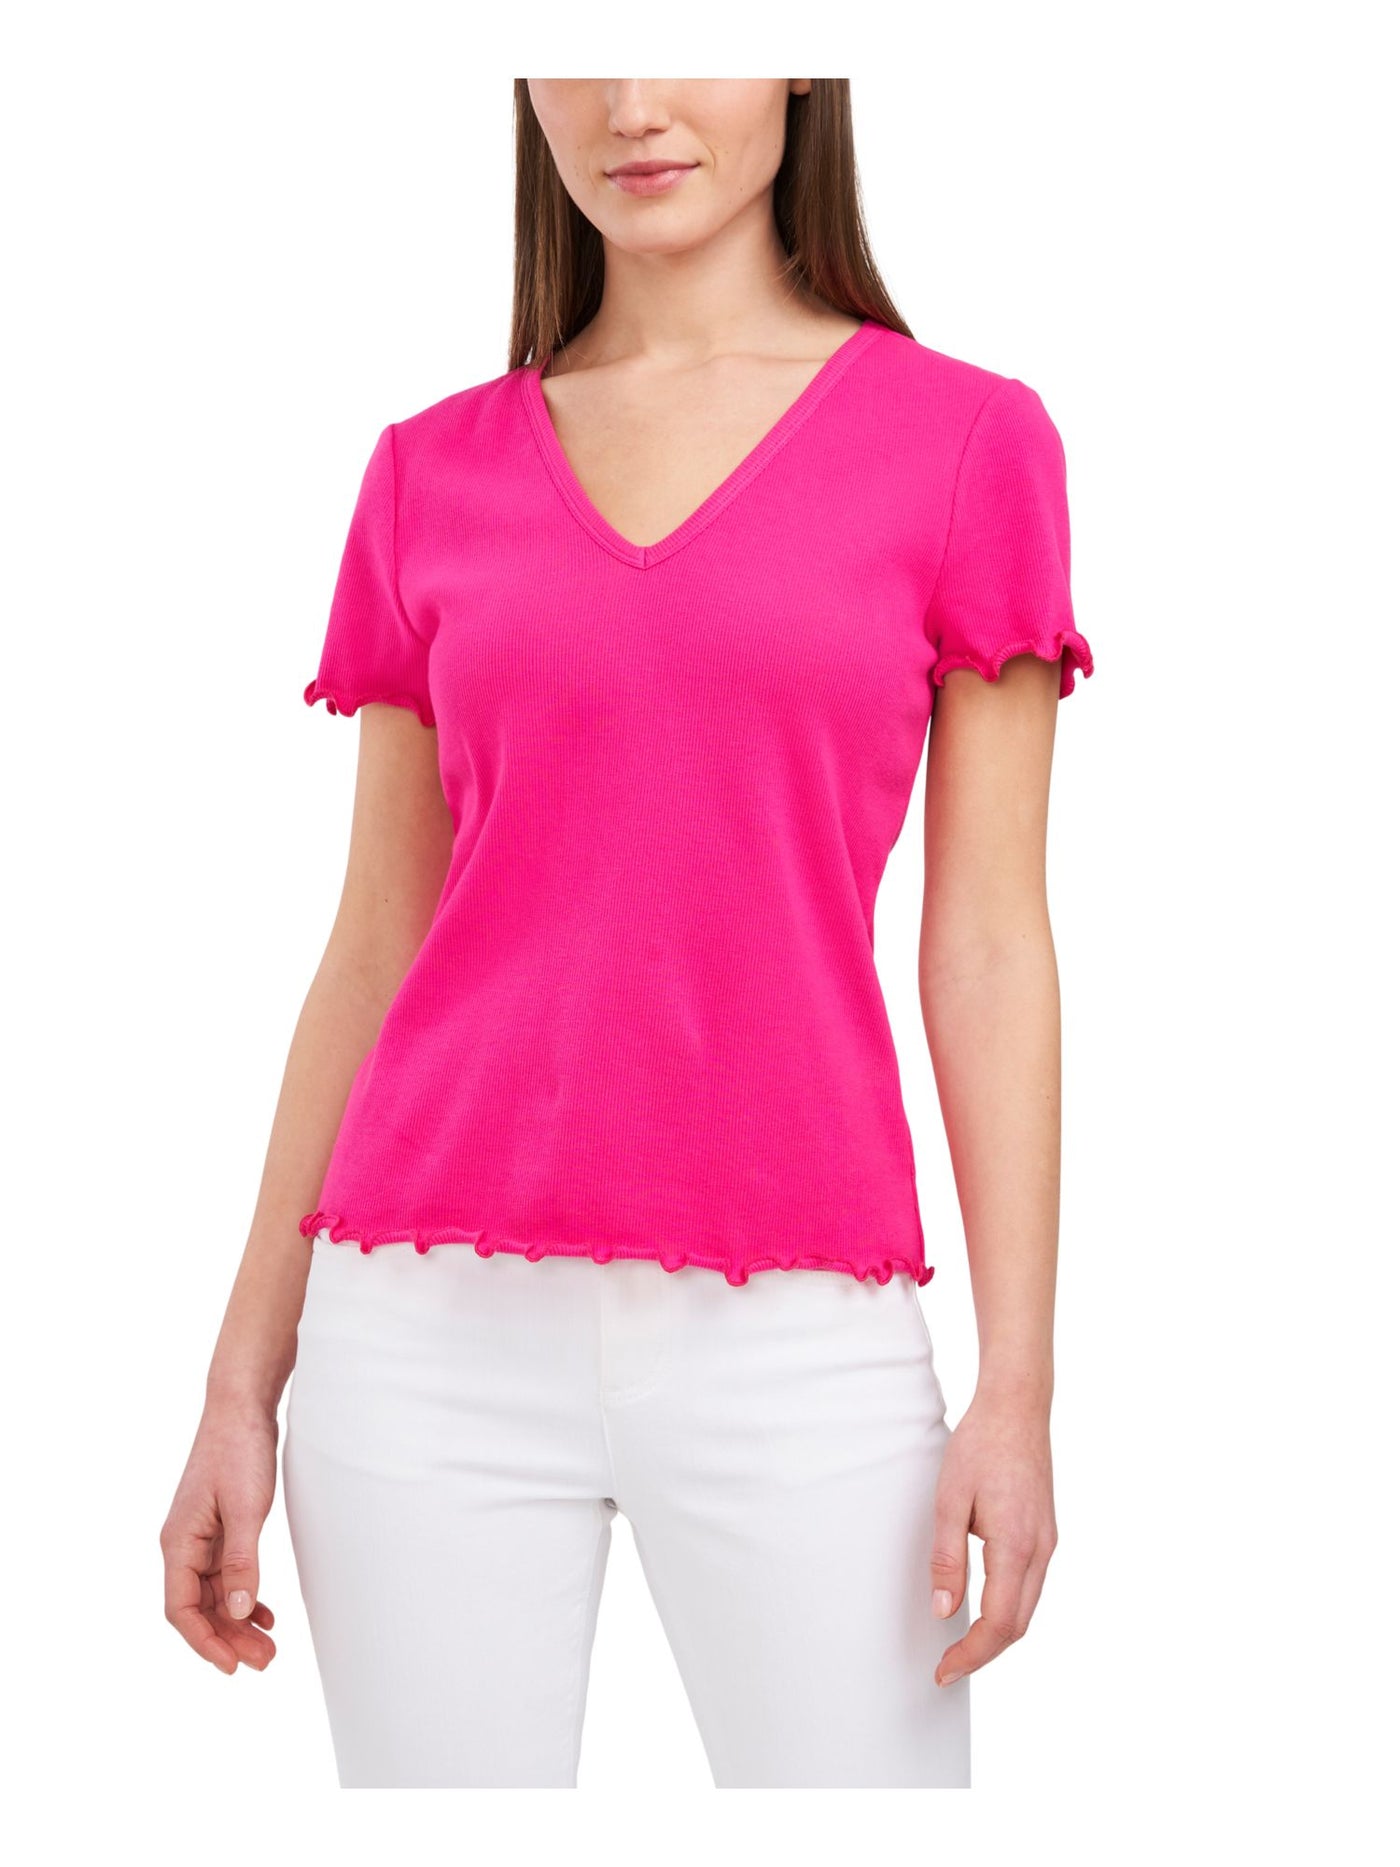 RILEY&RAE Womens Pink Stretch Ribbed Textured Scalloped Edge Cuffs And Hem Short Sleeve V Neck Top S